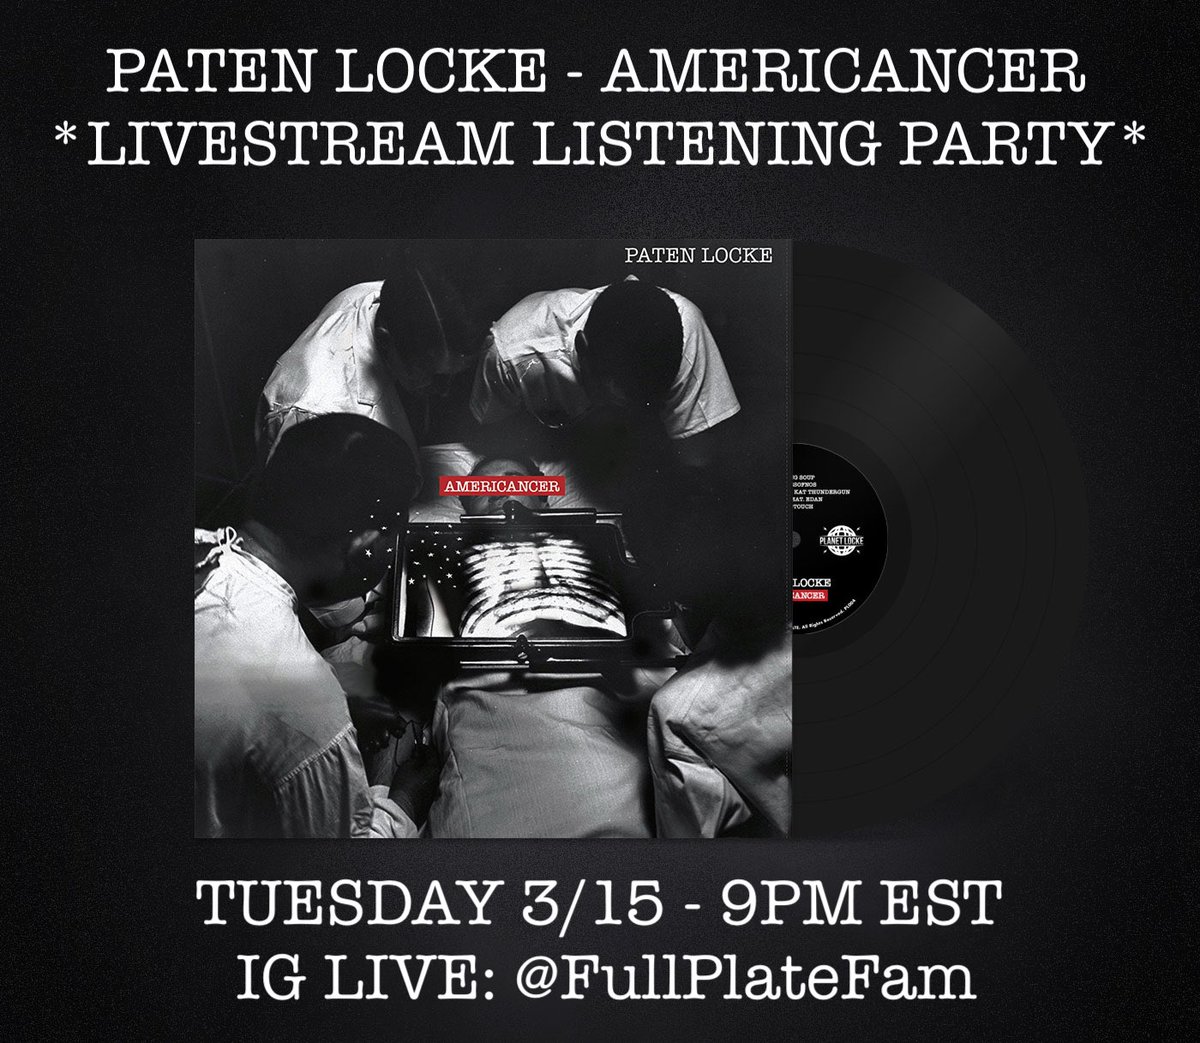 The new @PATENLOCKE album, AMERICANCER is OUT TODAY! Join us TONITE at 9pm EST on Instagram Live @fullplatefam as we run through the album, breakdown tracks and maybe even have some fly giveaways. 🙏

#PatenLocke #Americancer #PlanetLocke #FullPlateFam